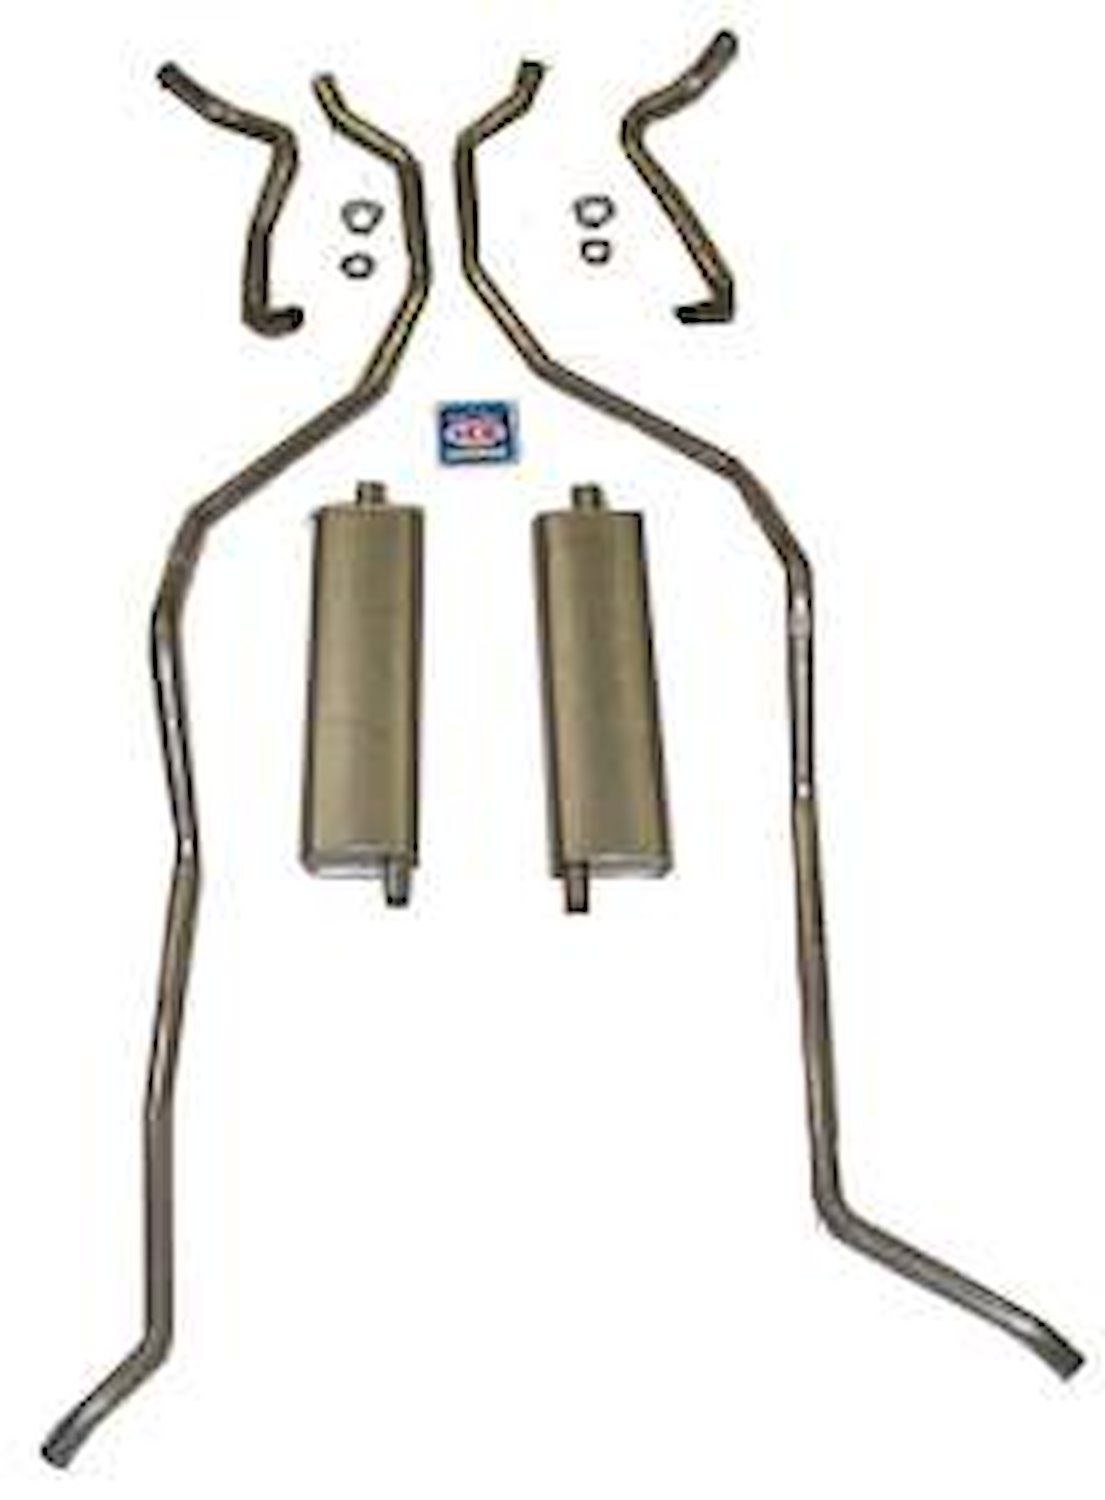 73011 1959 Chevrolet Full-Size Exhaust System 8-cyl 348 Dual